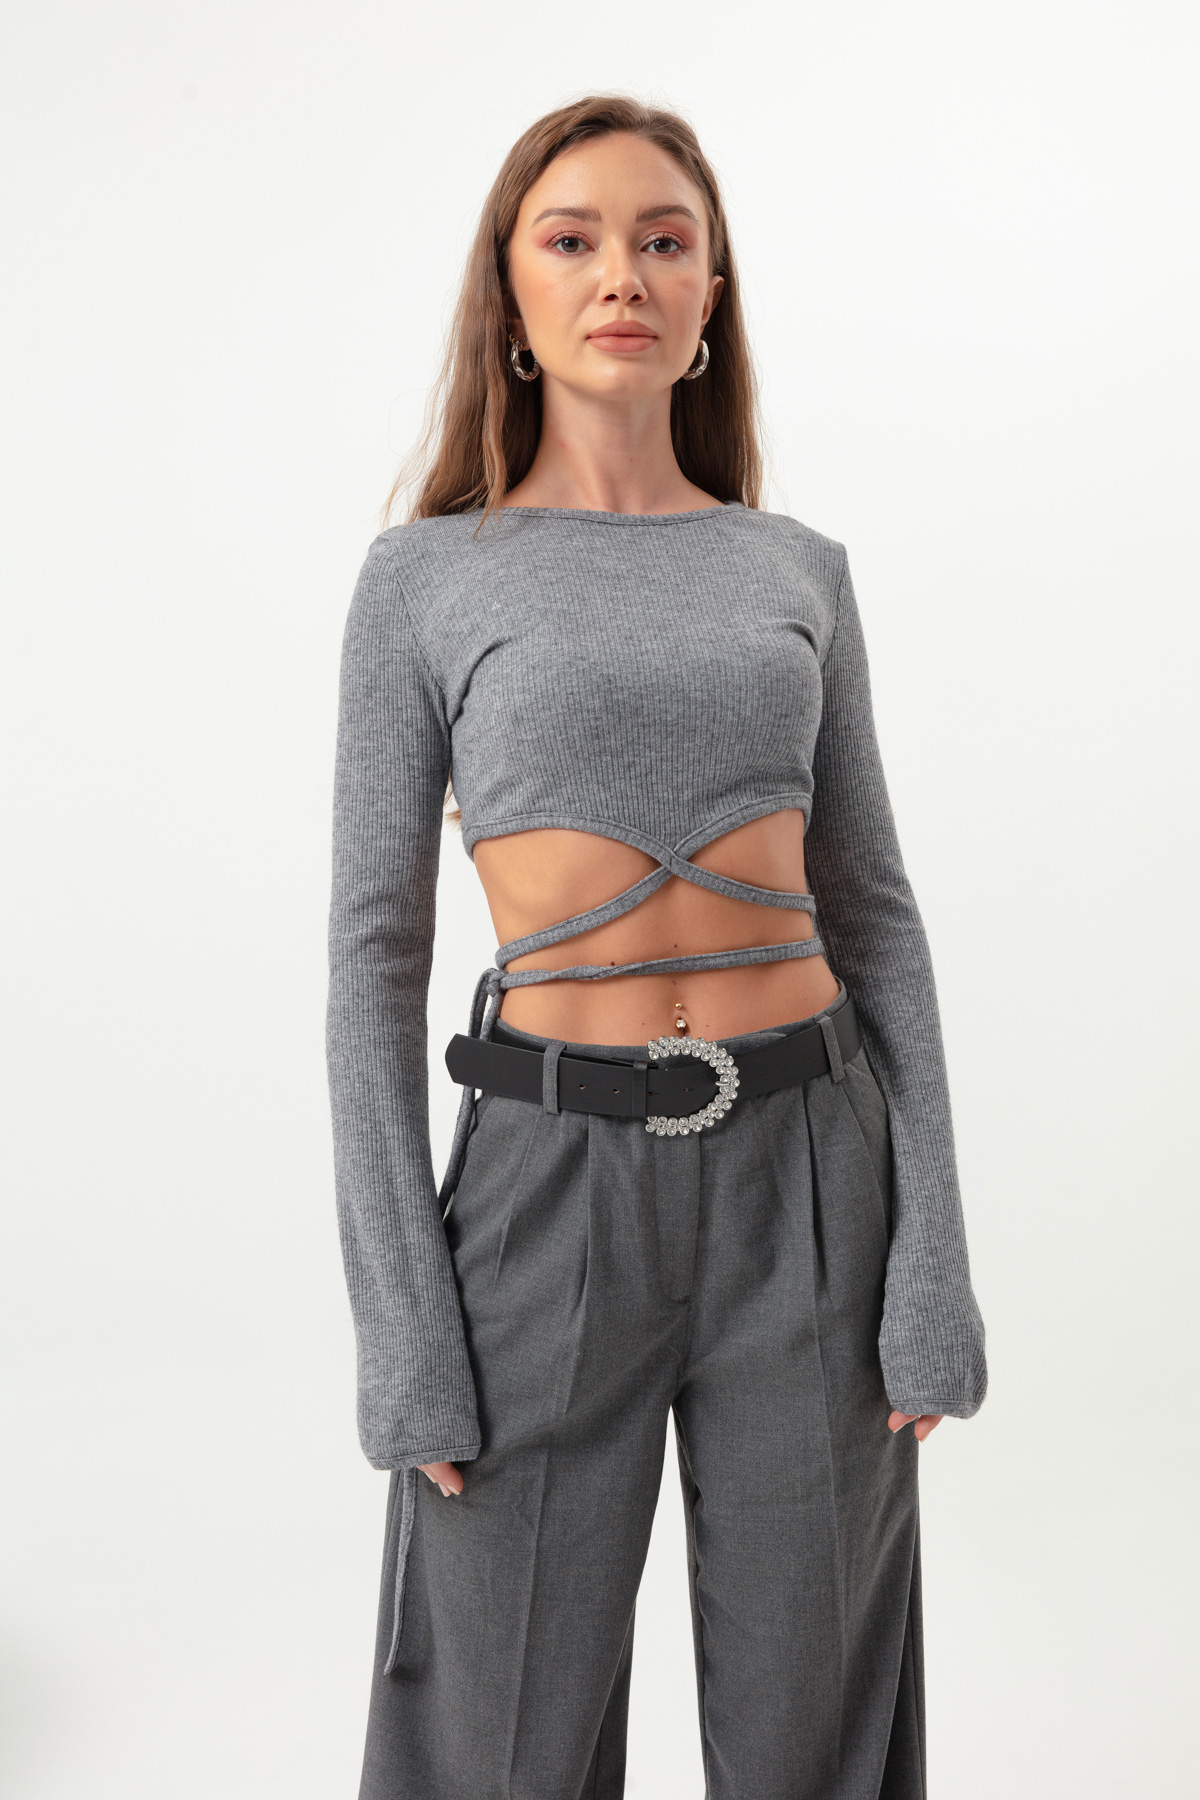 Women's Anthracite Knitted Crop